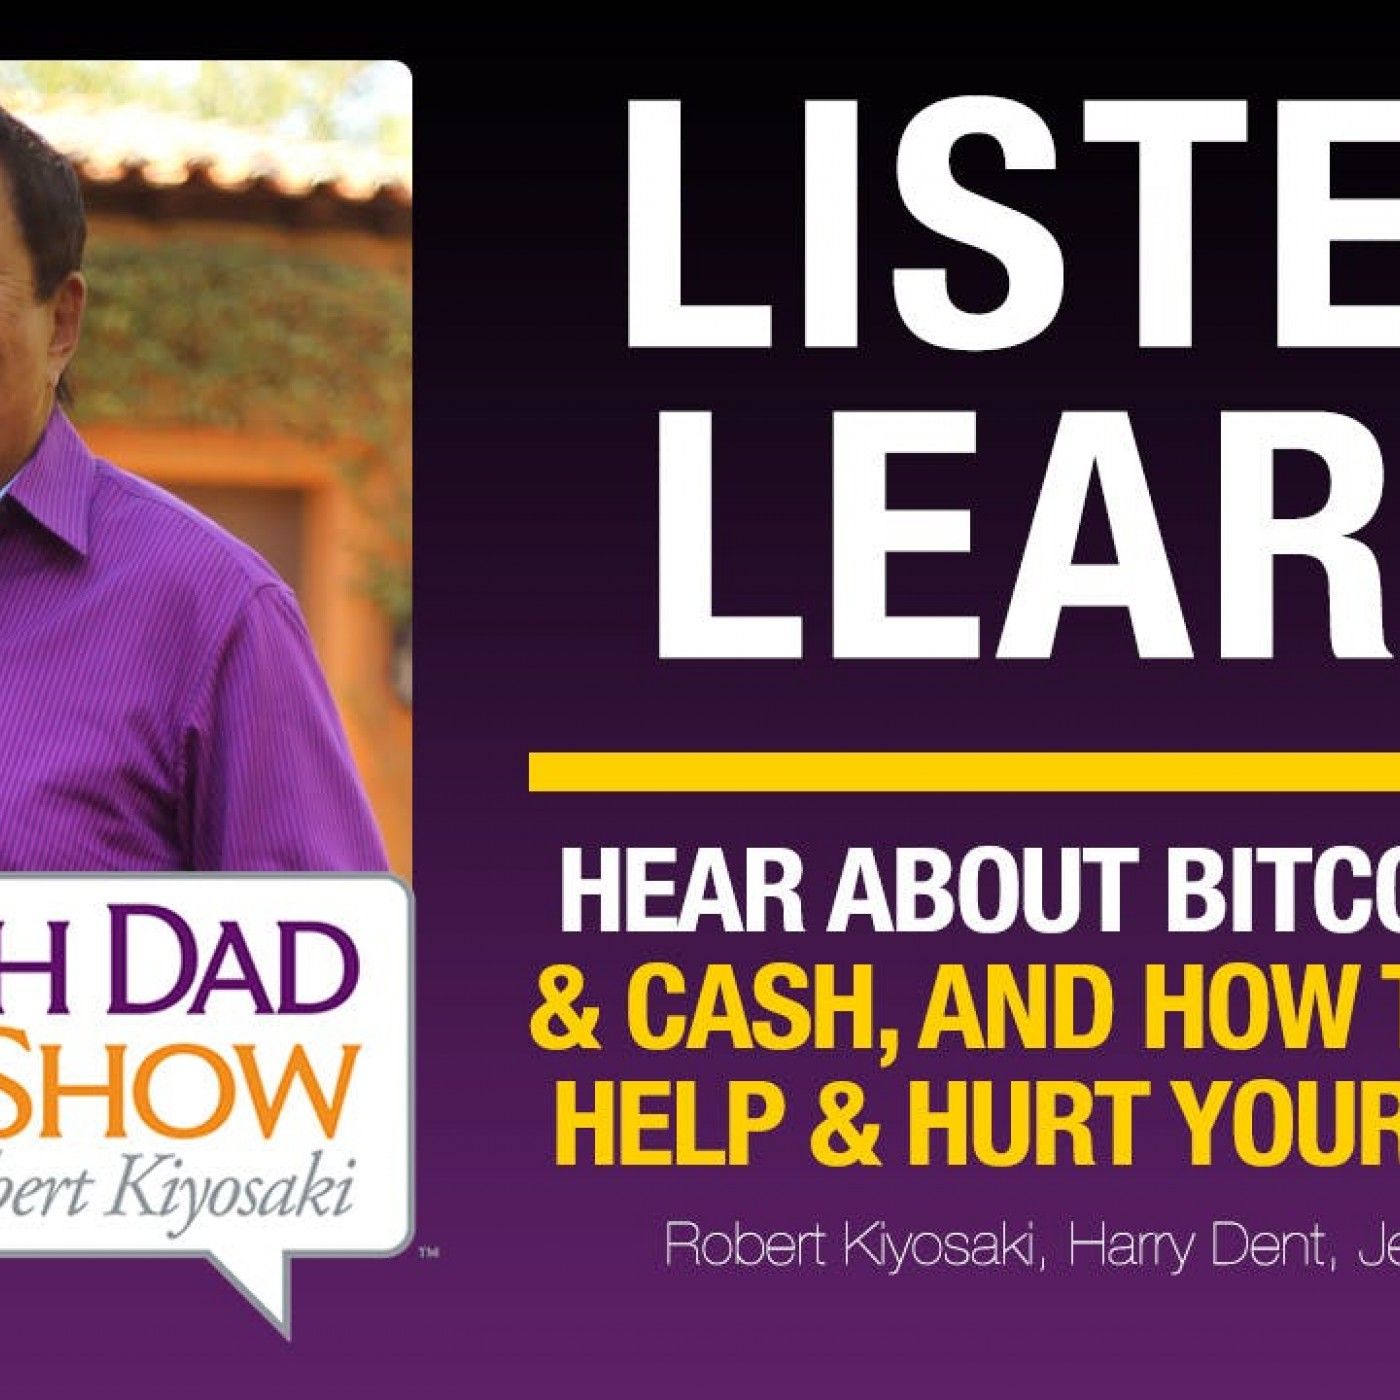 HEAR ABOUT BITCOIN, GOLD & CASH, AND HOW THEY CAN HELP & HURT YOUR WEALTH – Robert Kiyosaki, Harry Dent, Jerry Williams